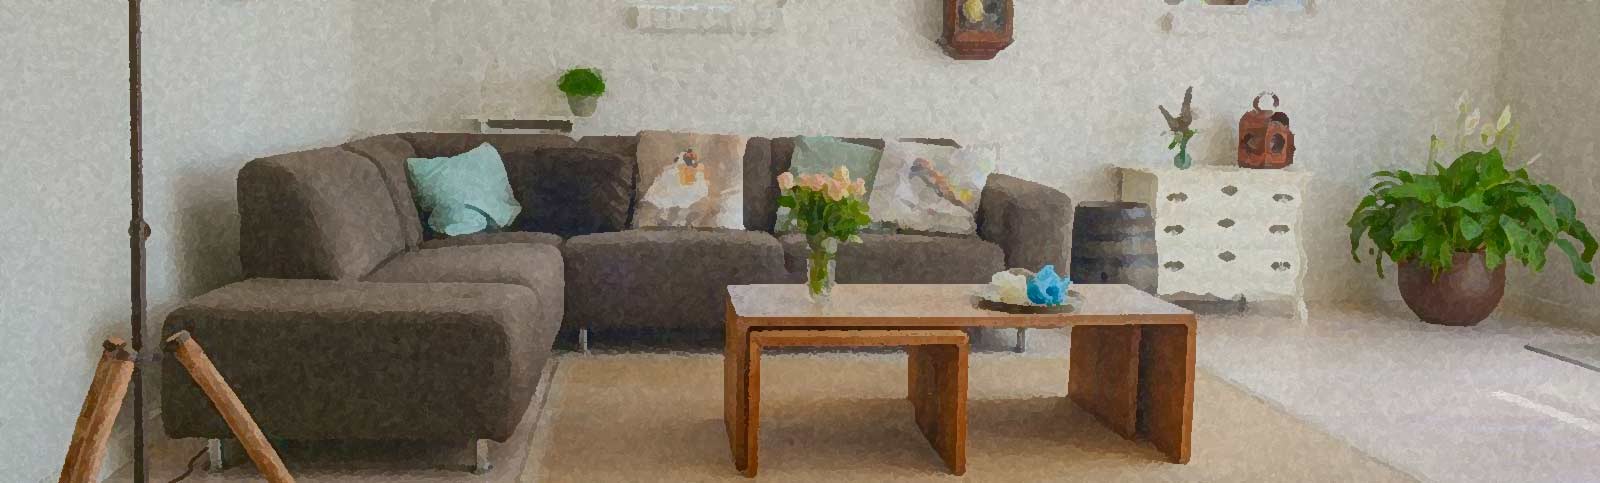 How Corner Sofas Can Help Transform Any Living Room